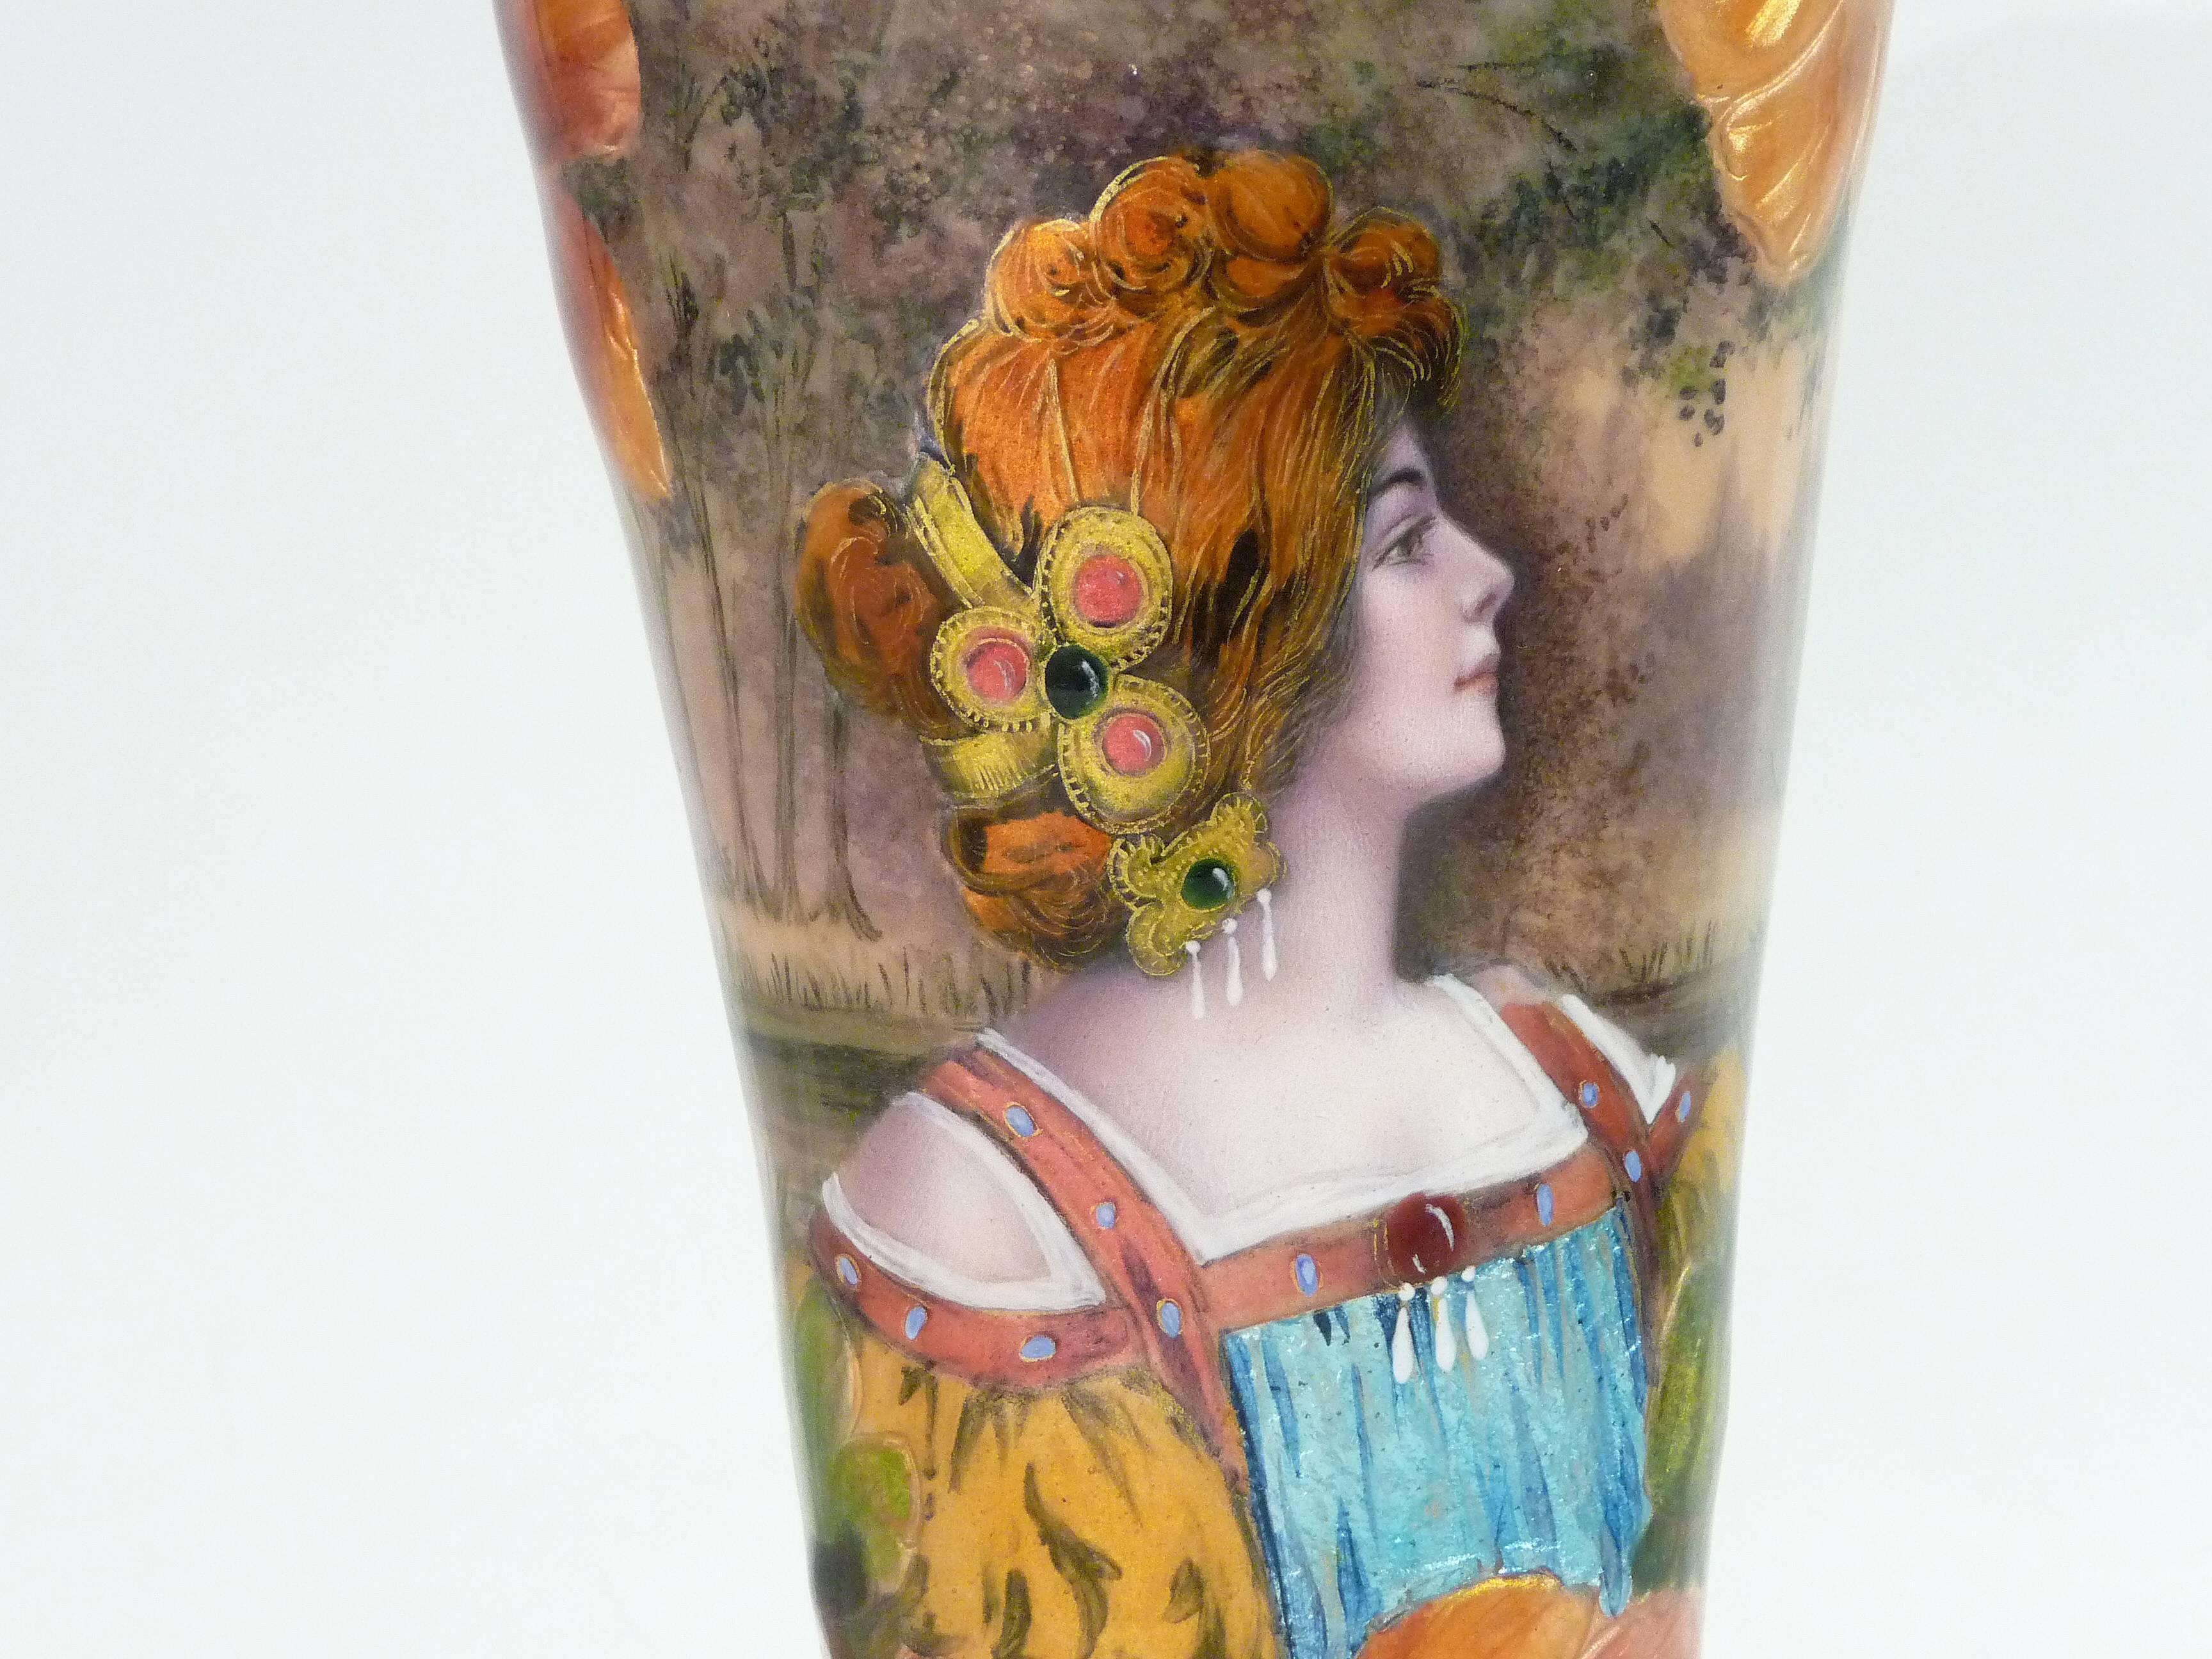 Anonymous.
An Art Nouveau enamel on copper vase featuring a woman and flowers on a landscape background.
Signed Borval.